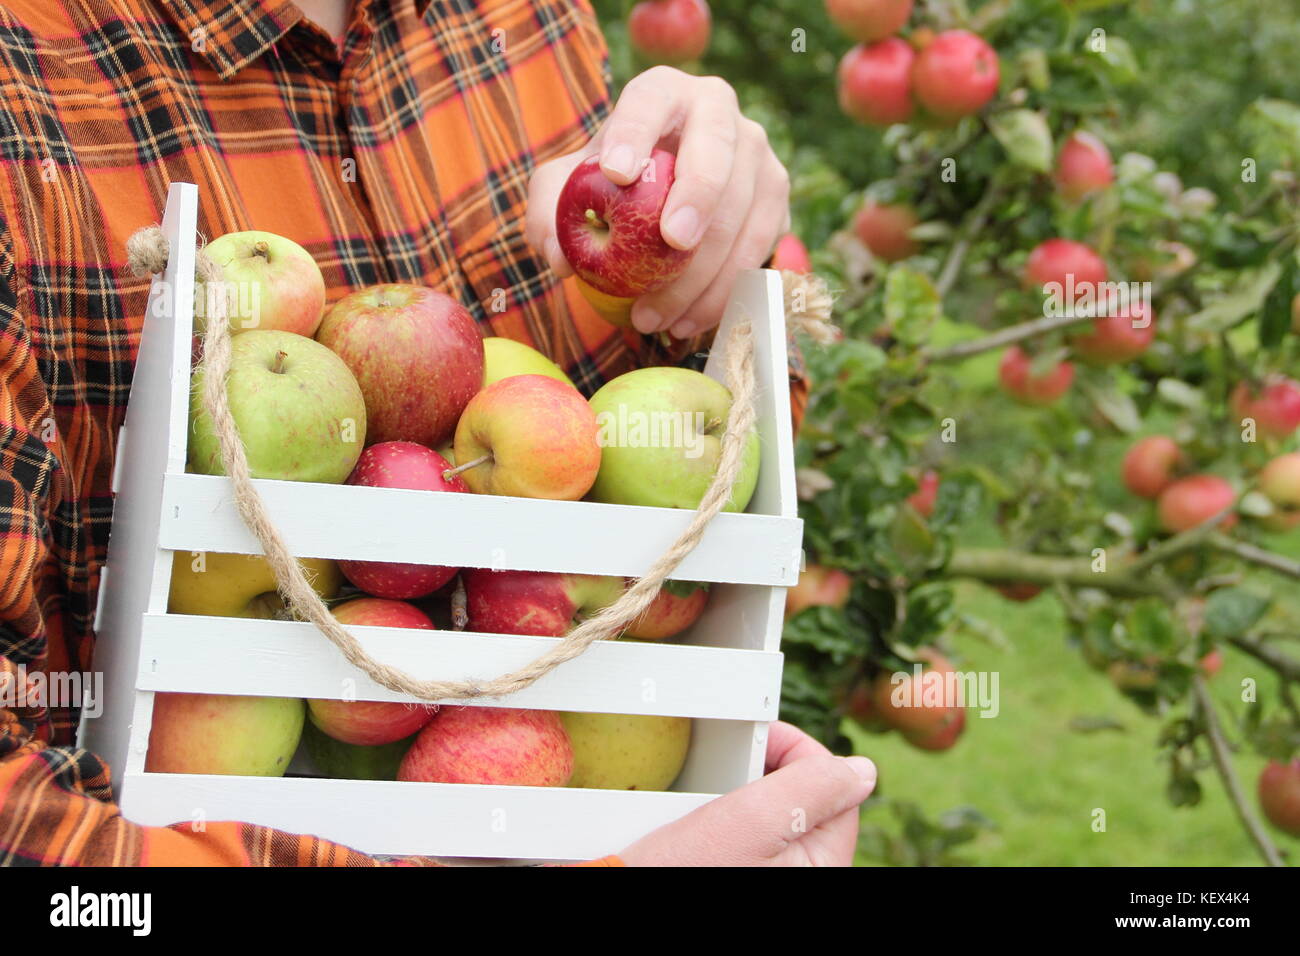 Heritage varieties of British apples (Malus domestica) are harvested in an English orchard at an Apple Day festival in autumn (October) Stock Photo